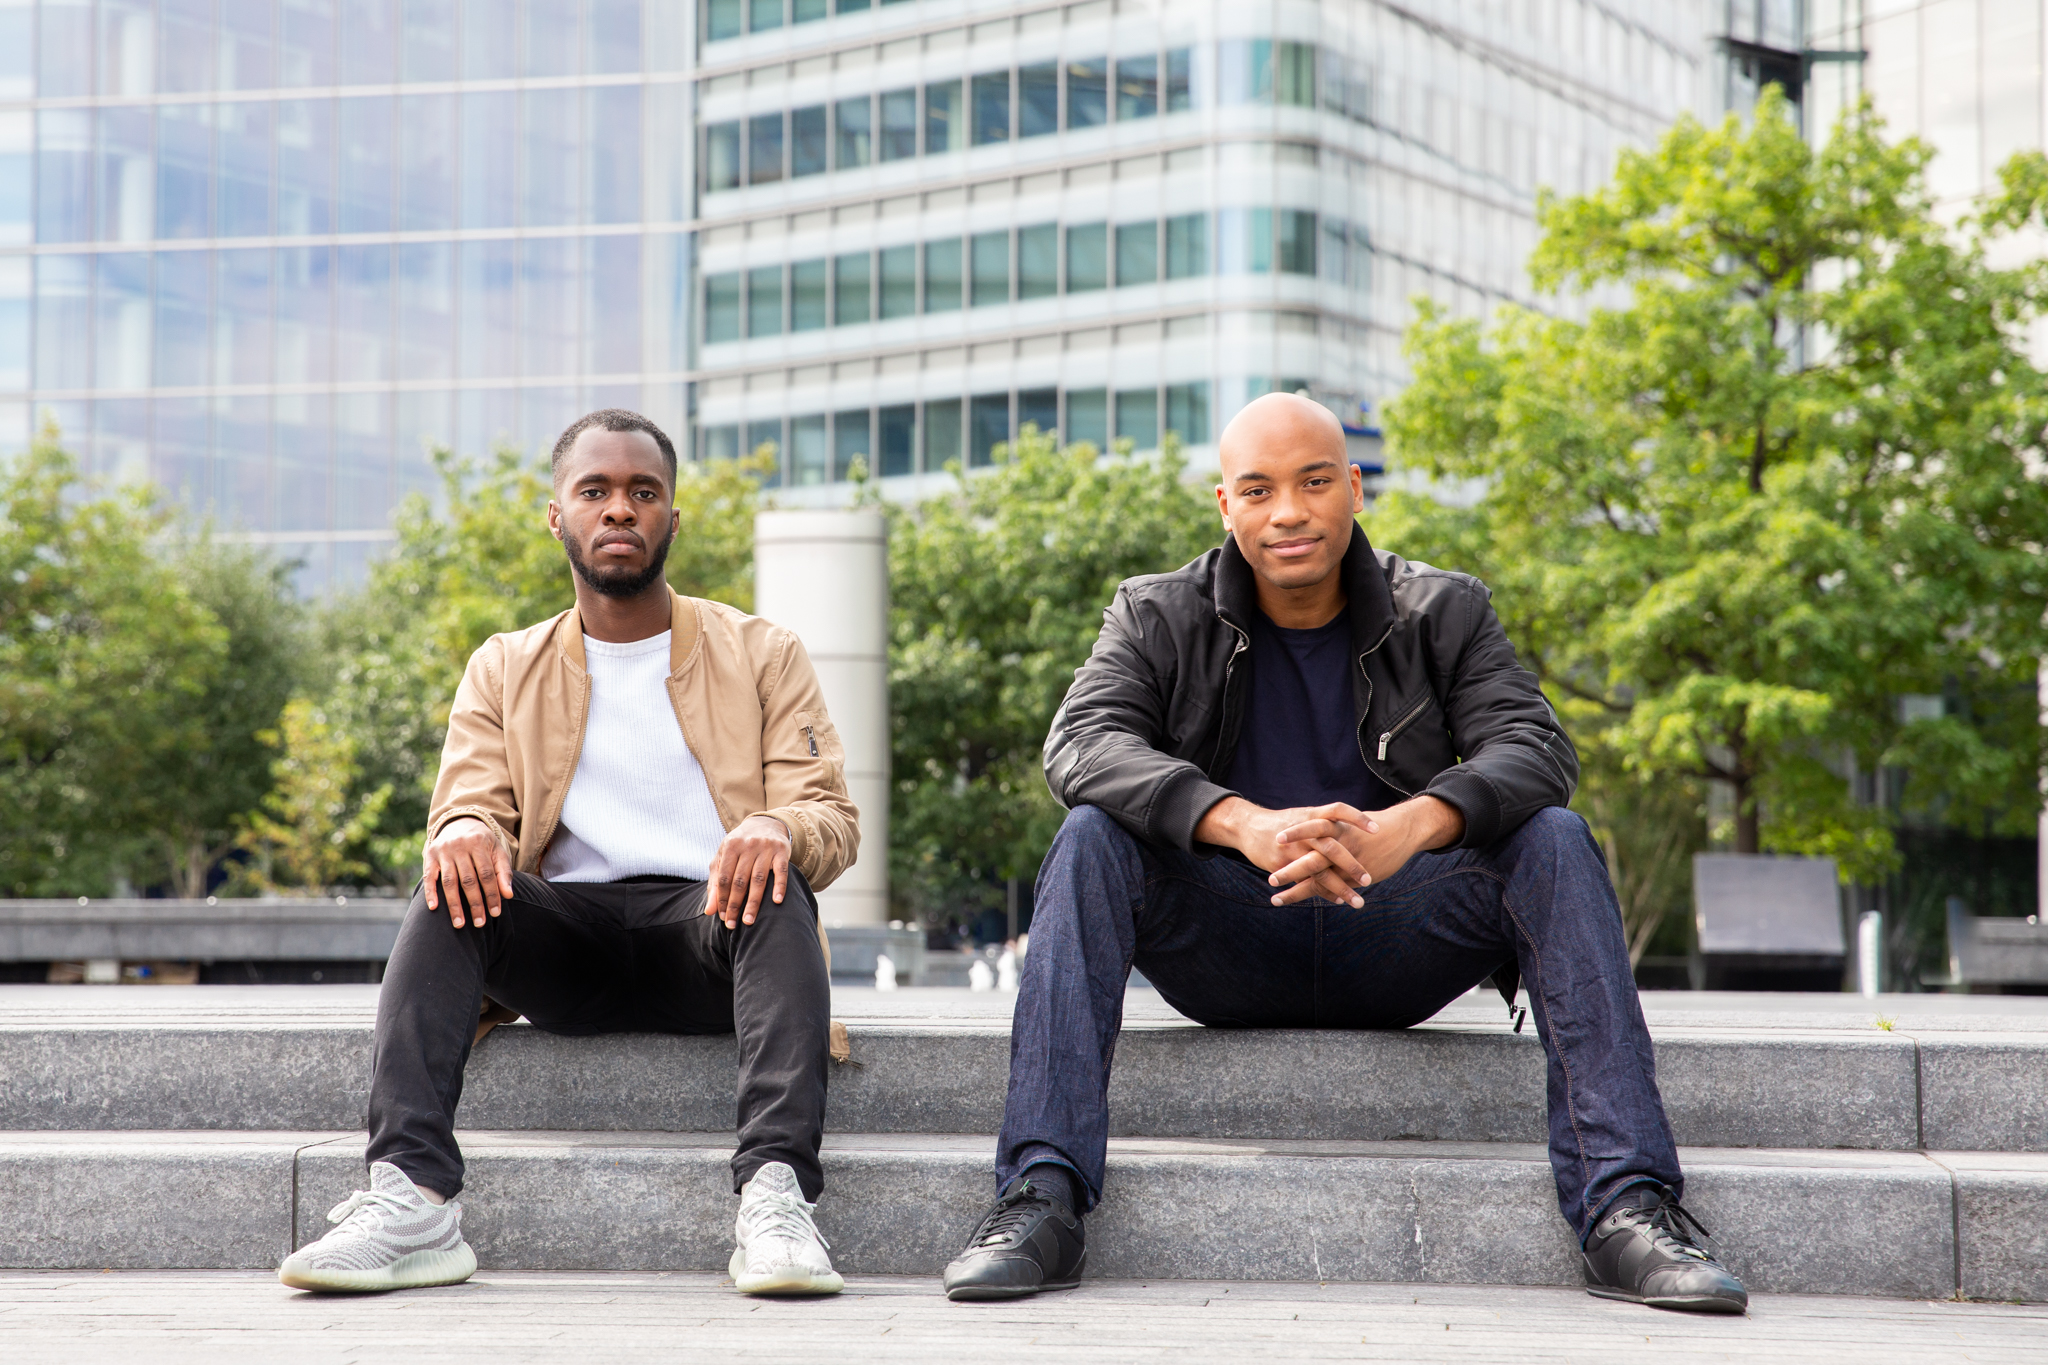 AudioMob’s founders make the Forbes 30 Under 30